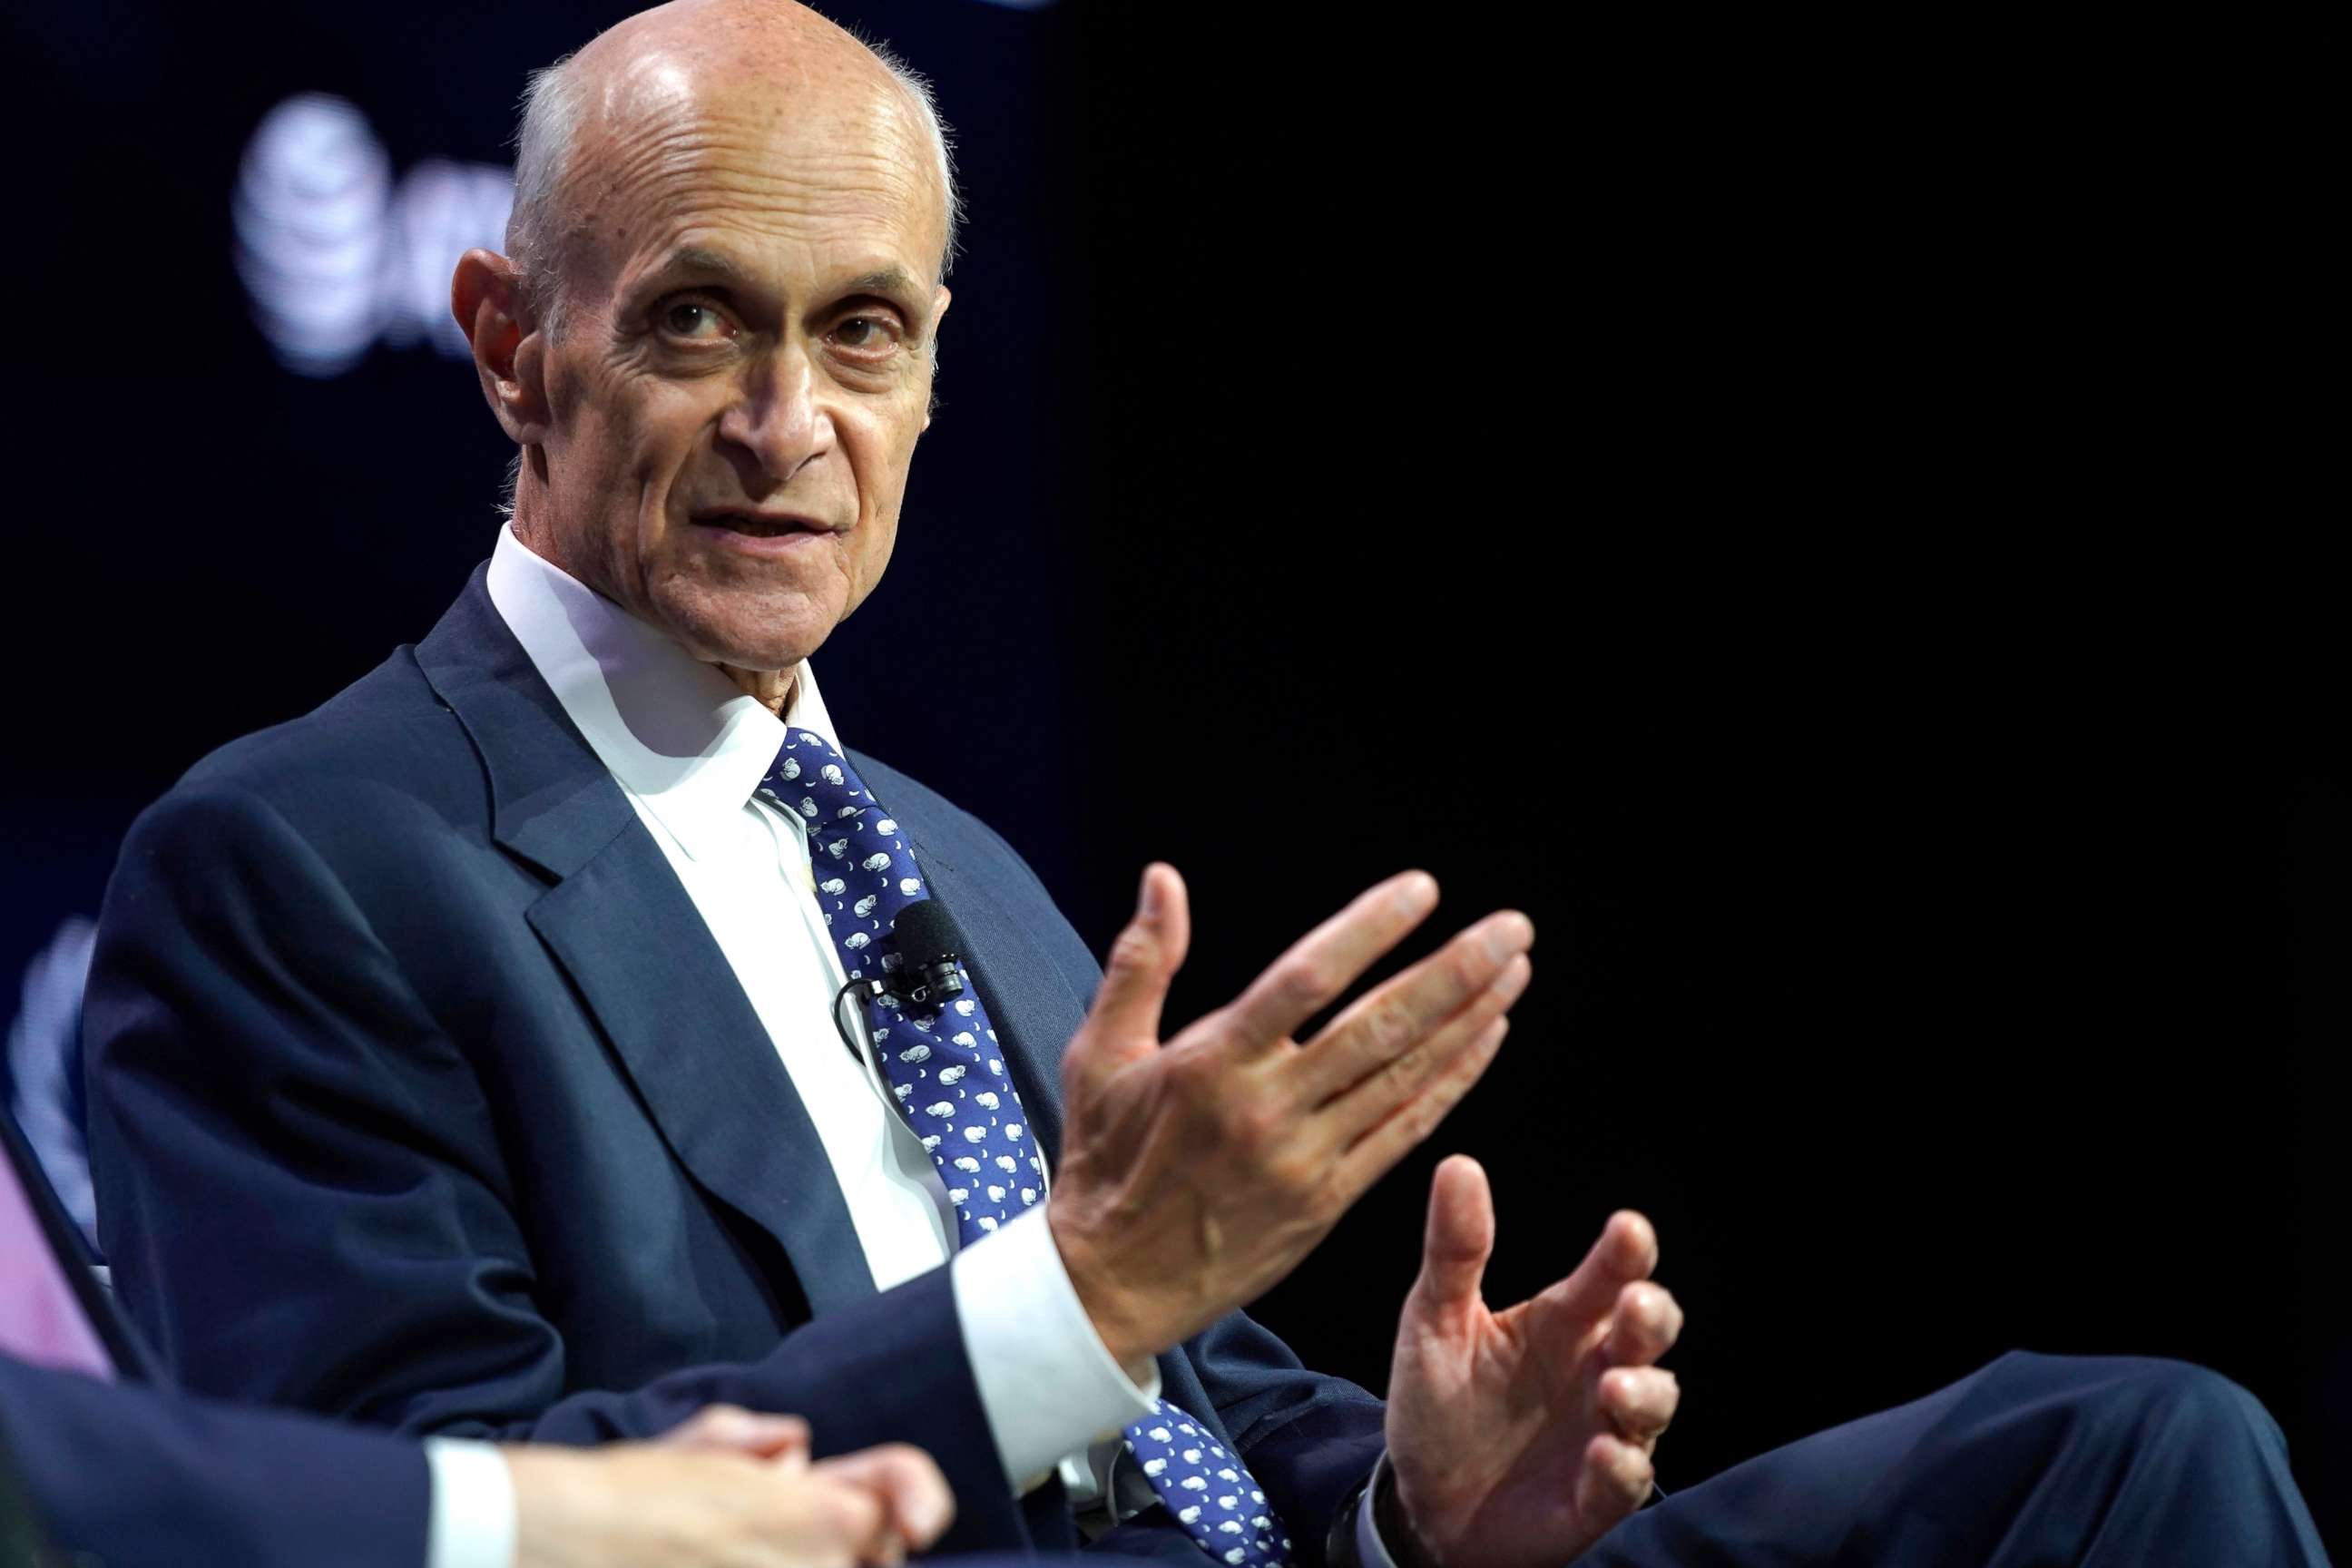 PHOTO: Michael Chertoff, Executive Chairman and Co-Founder of The Chertoff Group, speaks onstage during the 2019 Concordia Annual Summit, Sept. 23, 2019, in New York City.